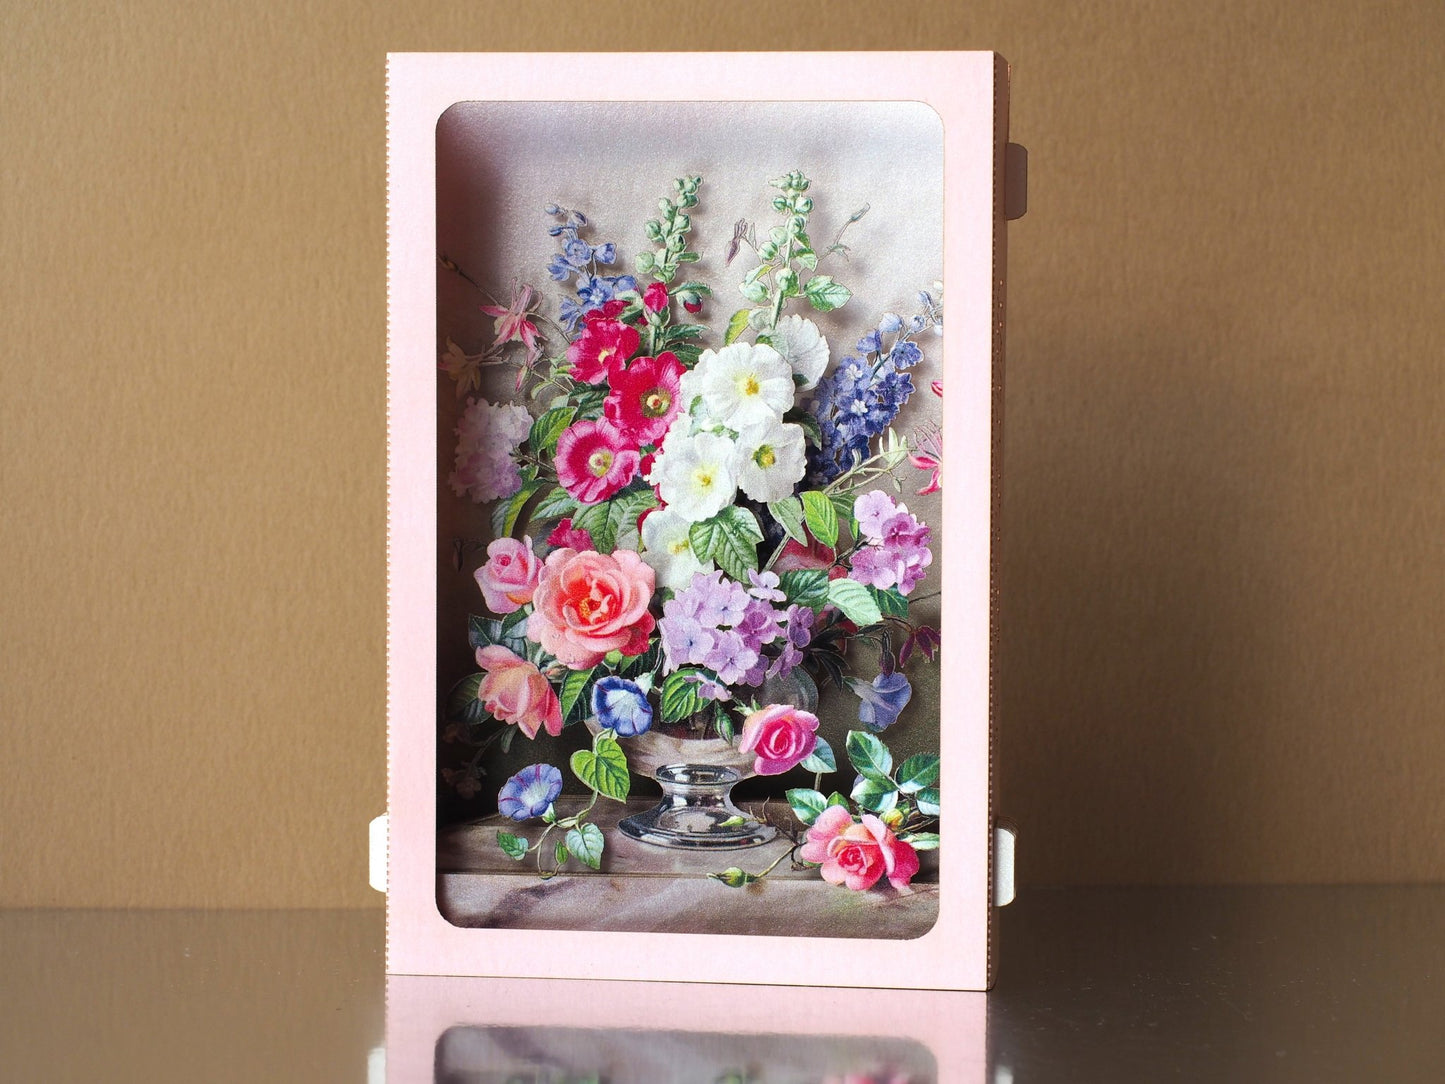 Flowers bouquet paper pop up card. Miniature. Mallow, hydrangea, rose, delphinium. , Her gift. Mother's Day. - ColibriGift